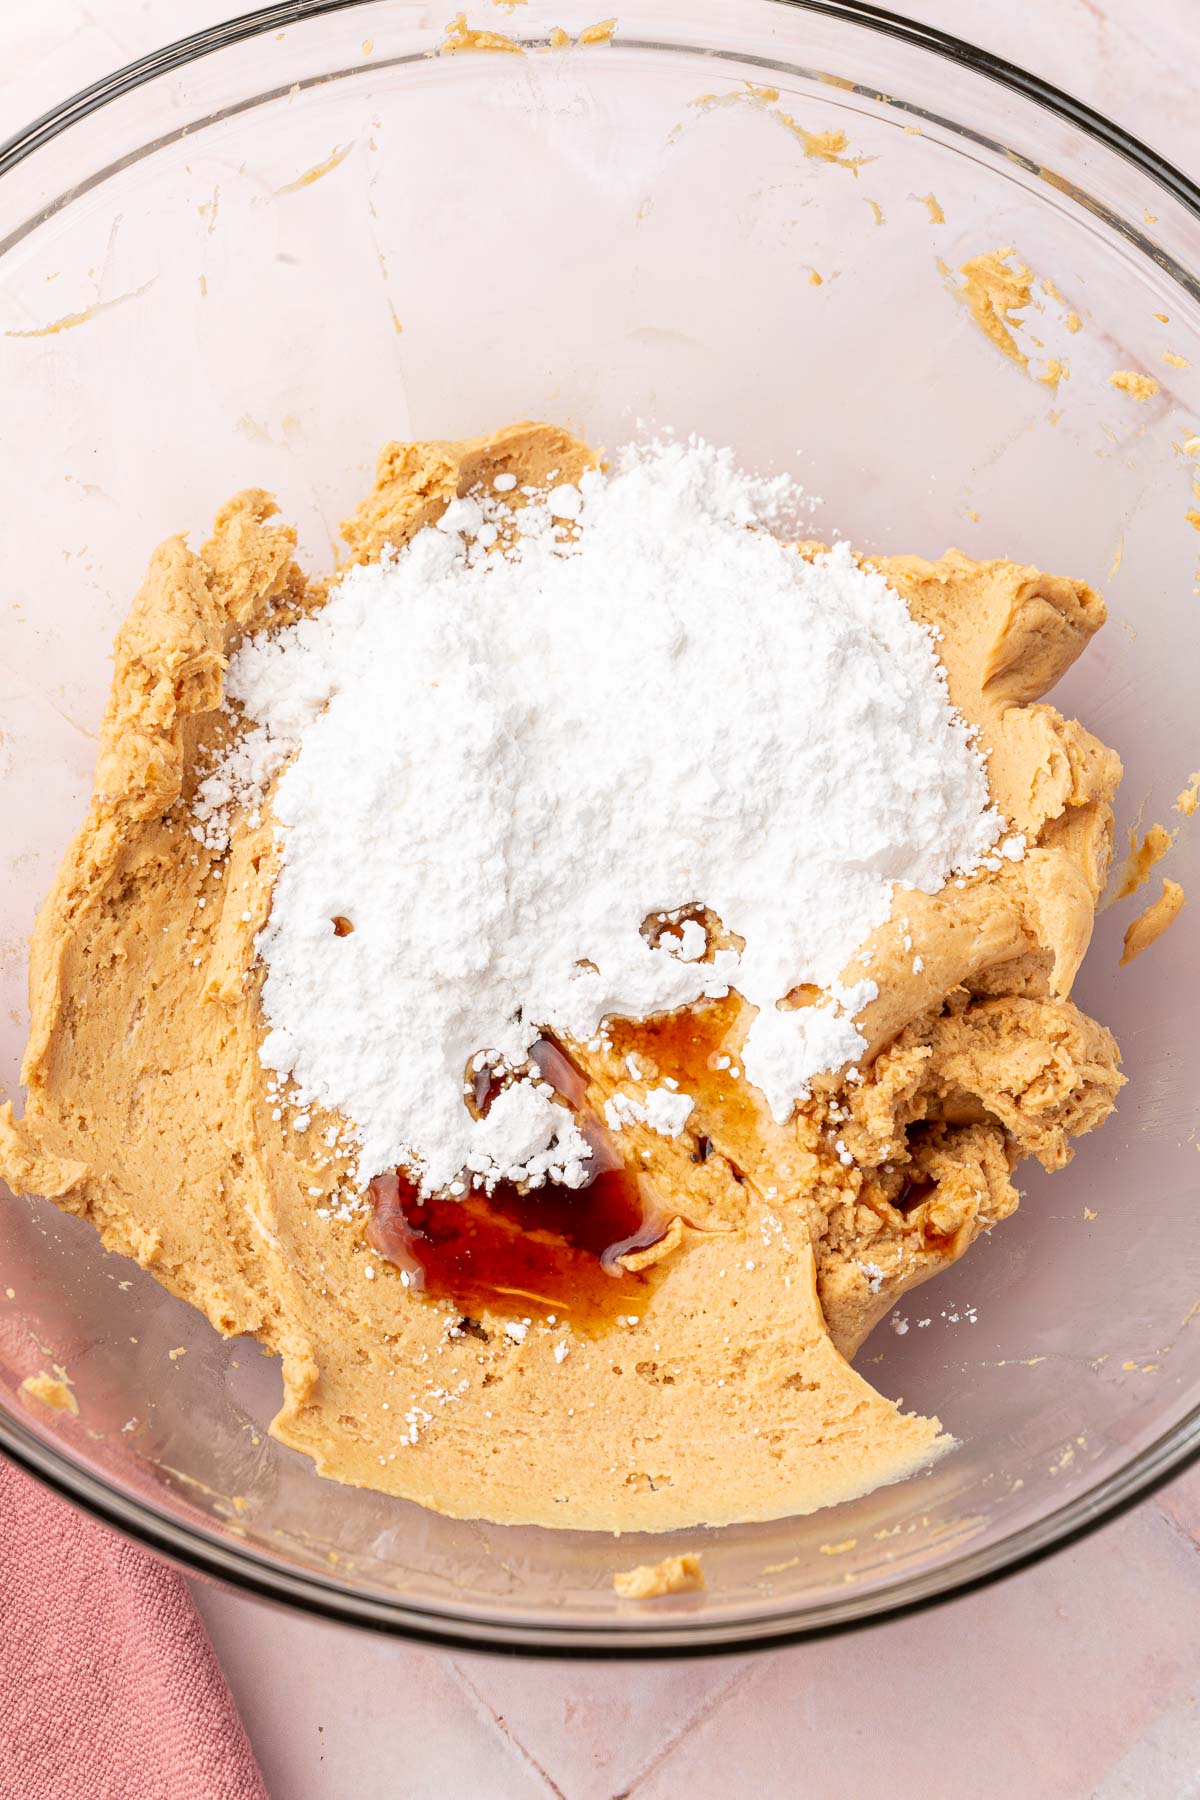 A glass mixing bowl with a peanut butter cream cheese mixture topped with powdered sugar and vanilla extract.